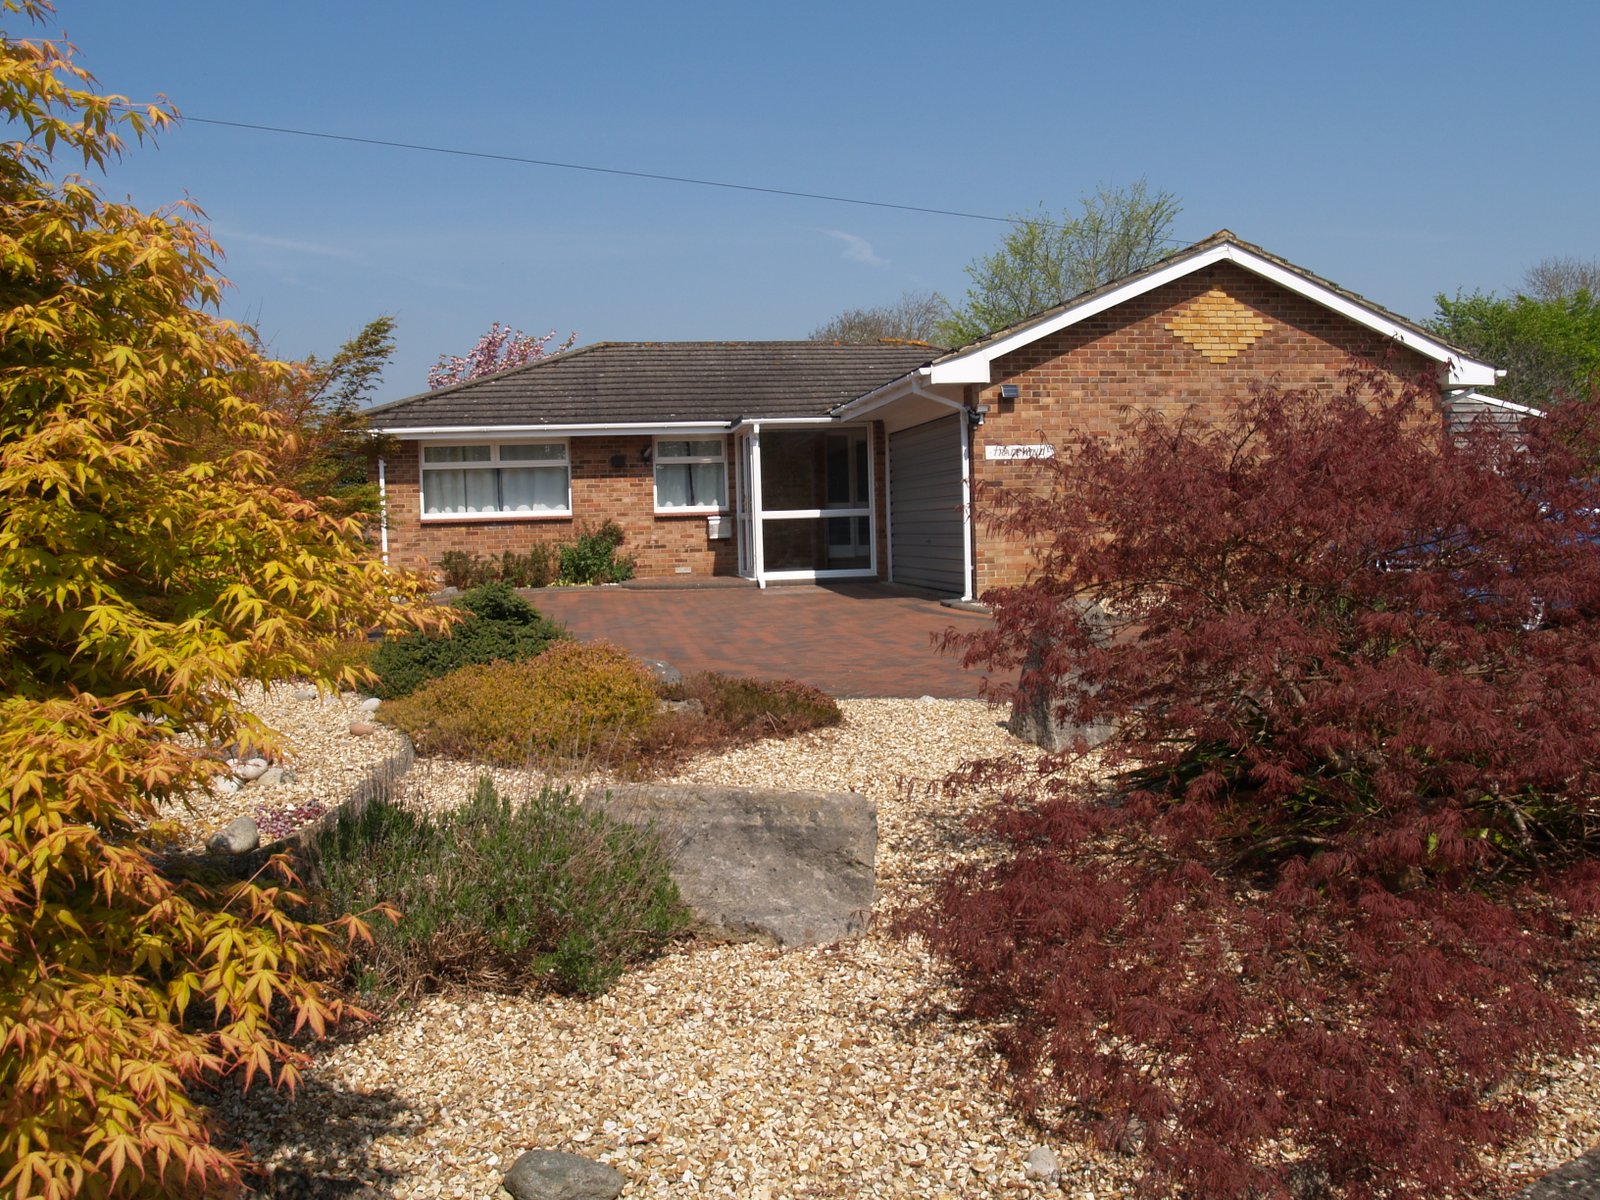 A picture of a bungalow and driveway with a blue sky and gravel garden area on the Isle of Wight